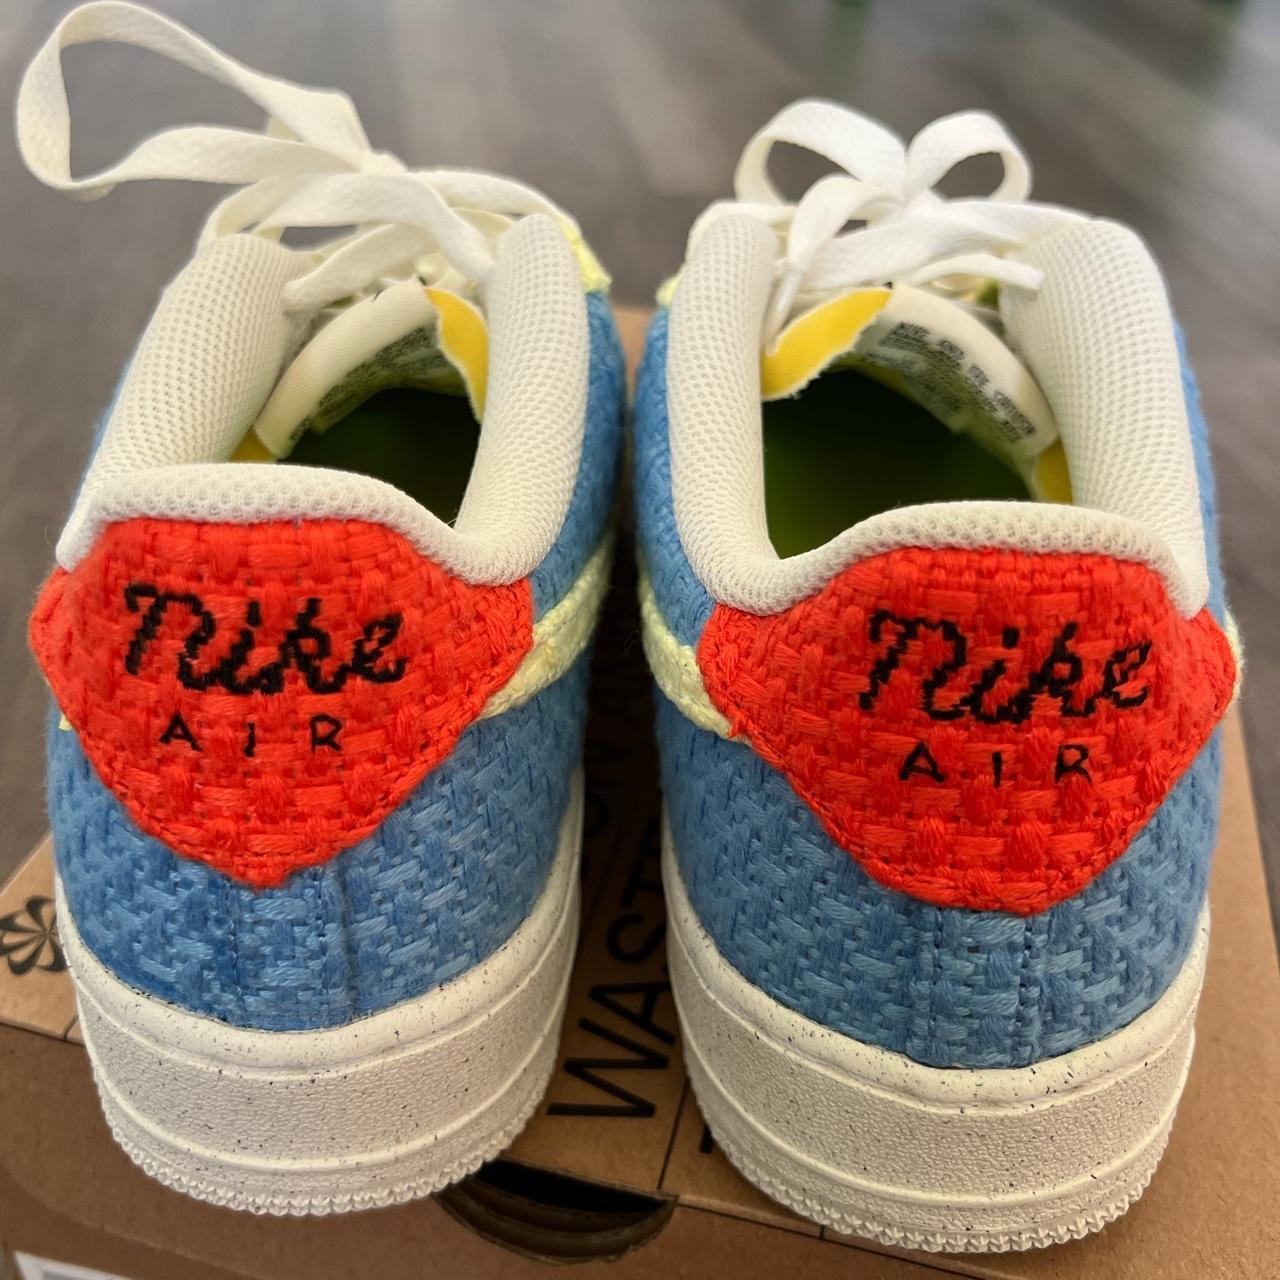 Nike Air Force 1 LV8 3 (GS) _____ WILLING TO - Depop